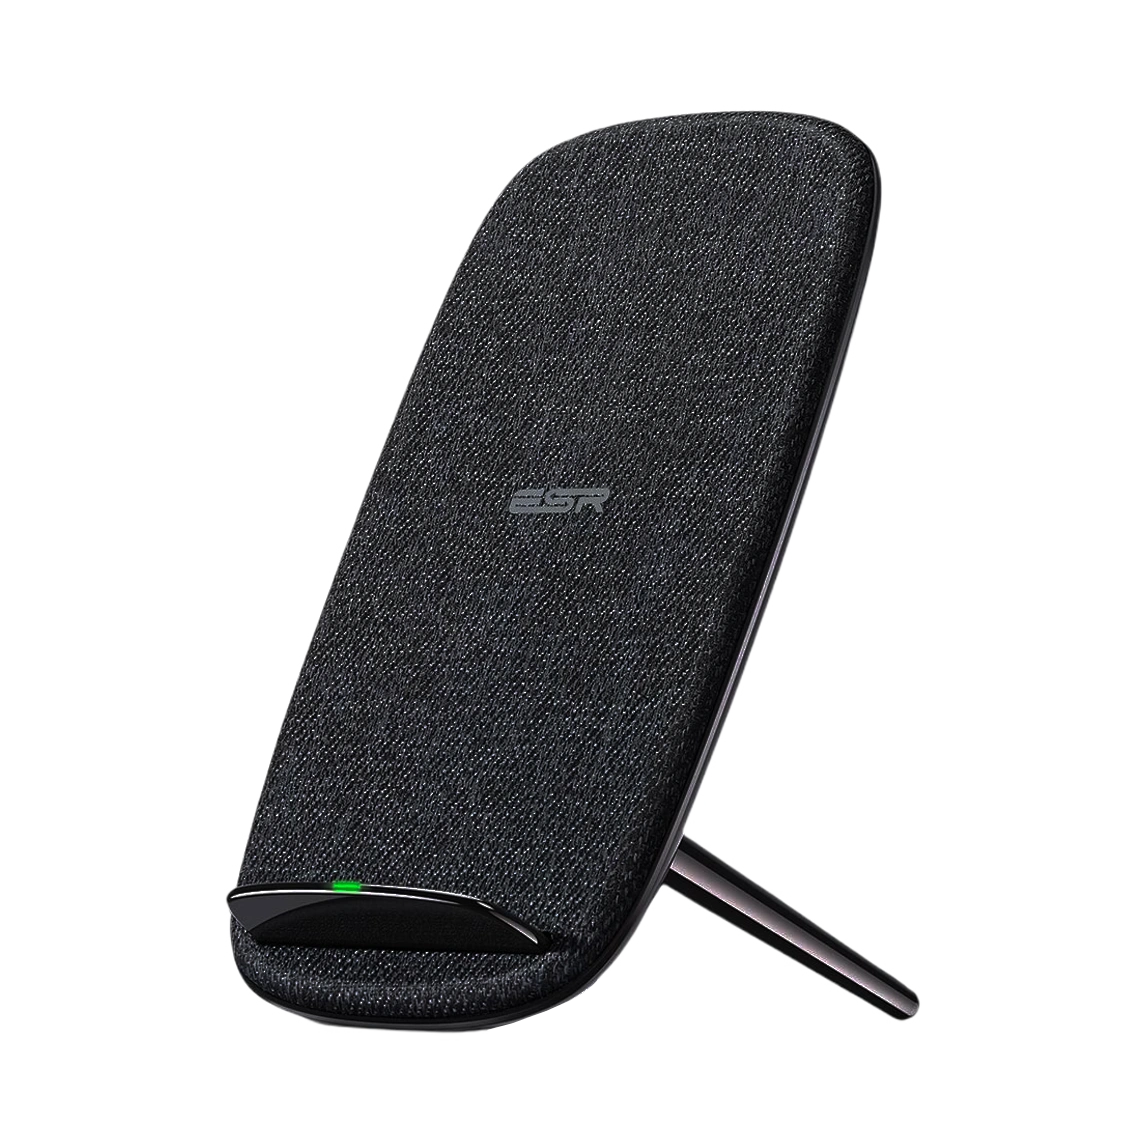 ESR Lounge Stand Wireless Charger